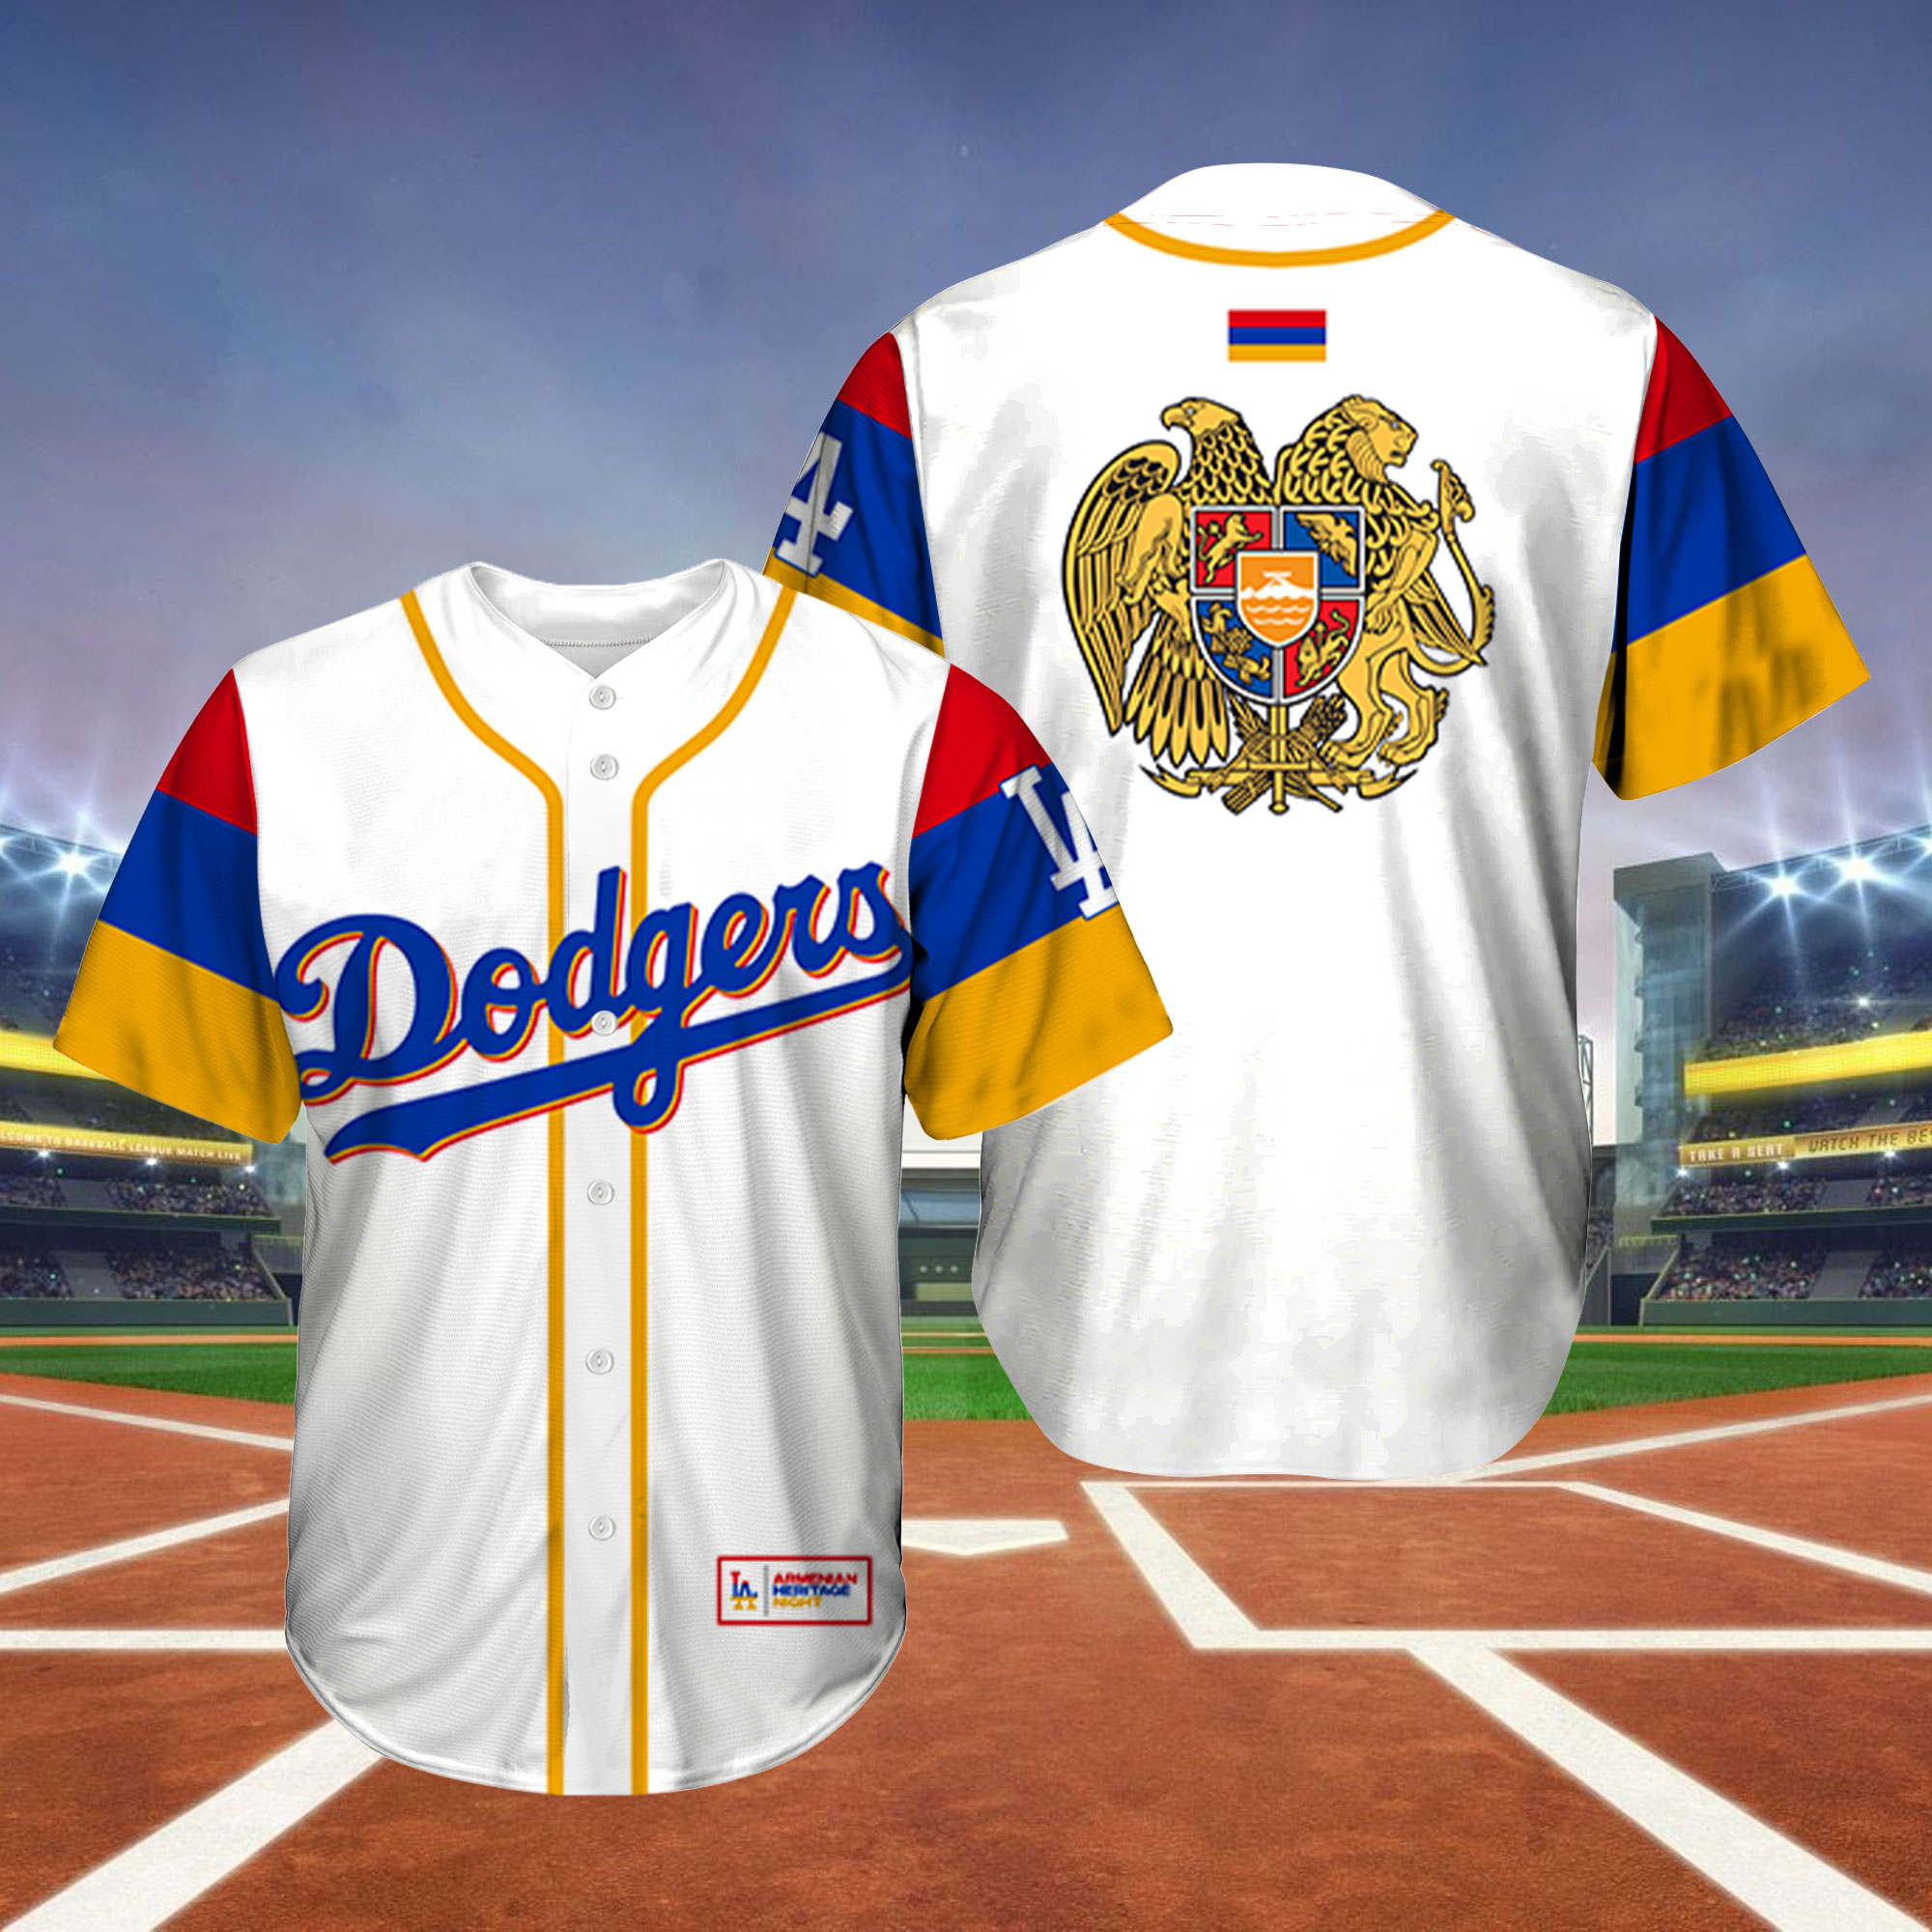 Los Angeles Dodgers Signed Jerseys, Collectible Dodgers Jerseys, Los  Angeles Dodgers Memorabilia Jerseys